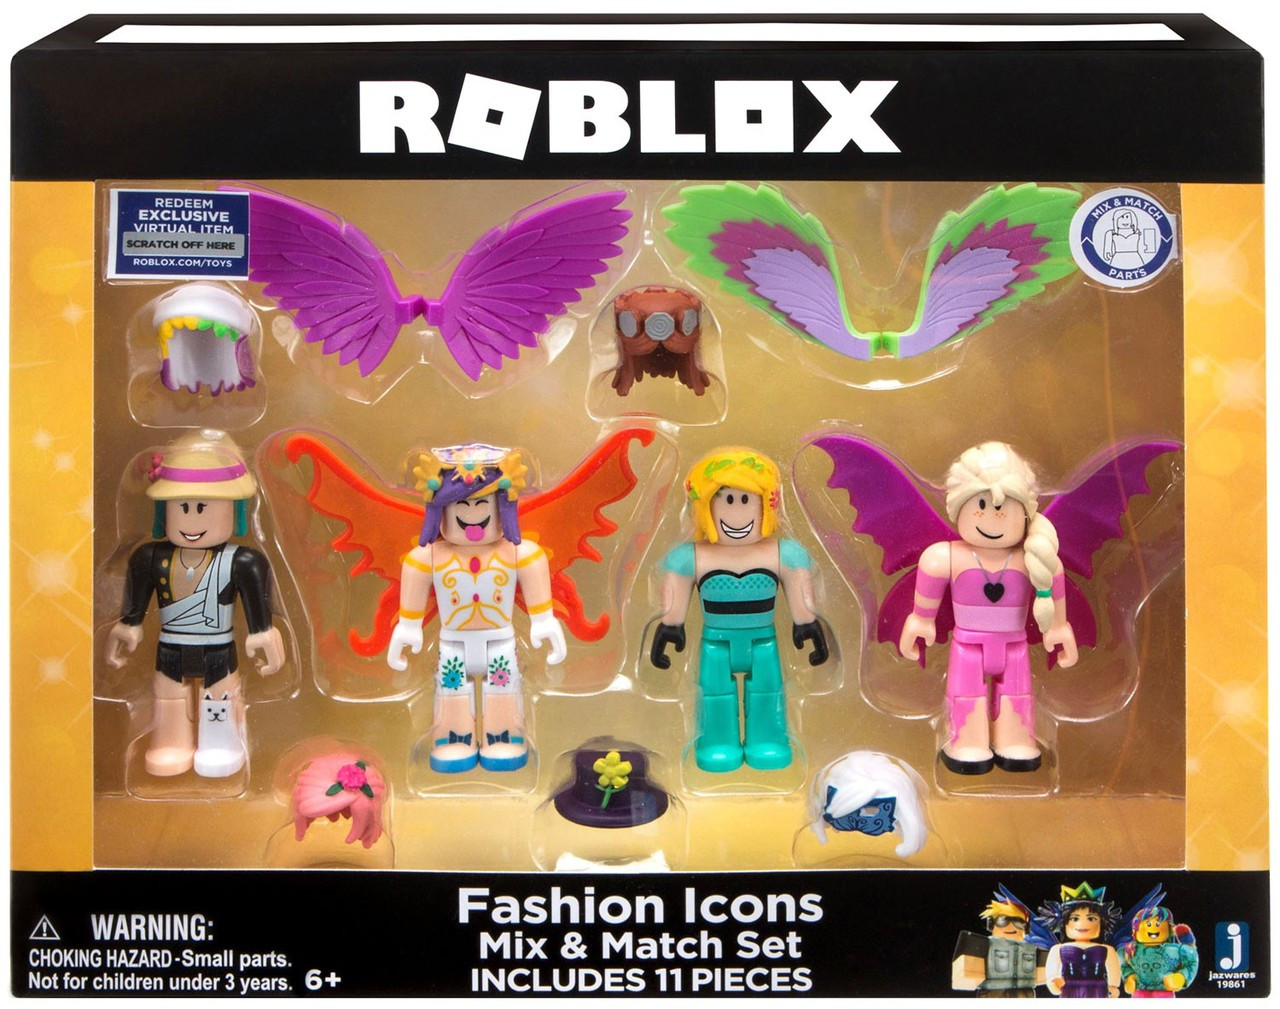 Roblox Celebrity Collection Fashion Icons Action Figure 4 Pack - details about roblox celebrity collection roblox bride with exclusive virtual item